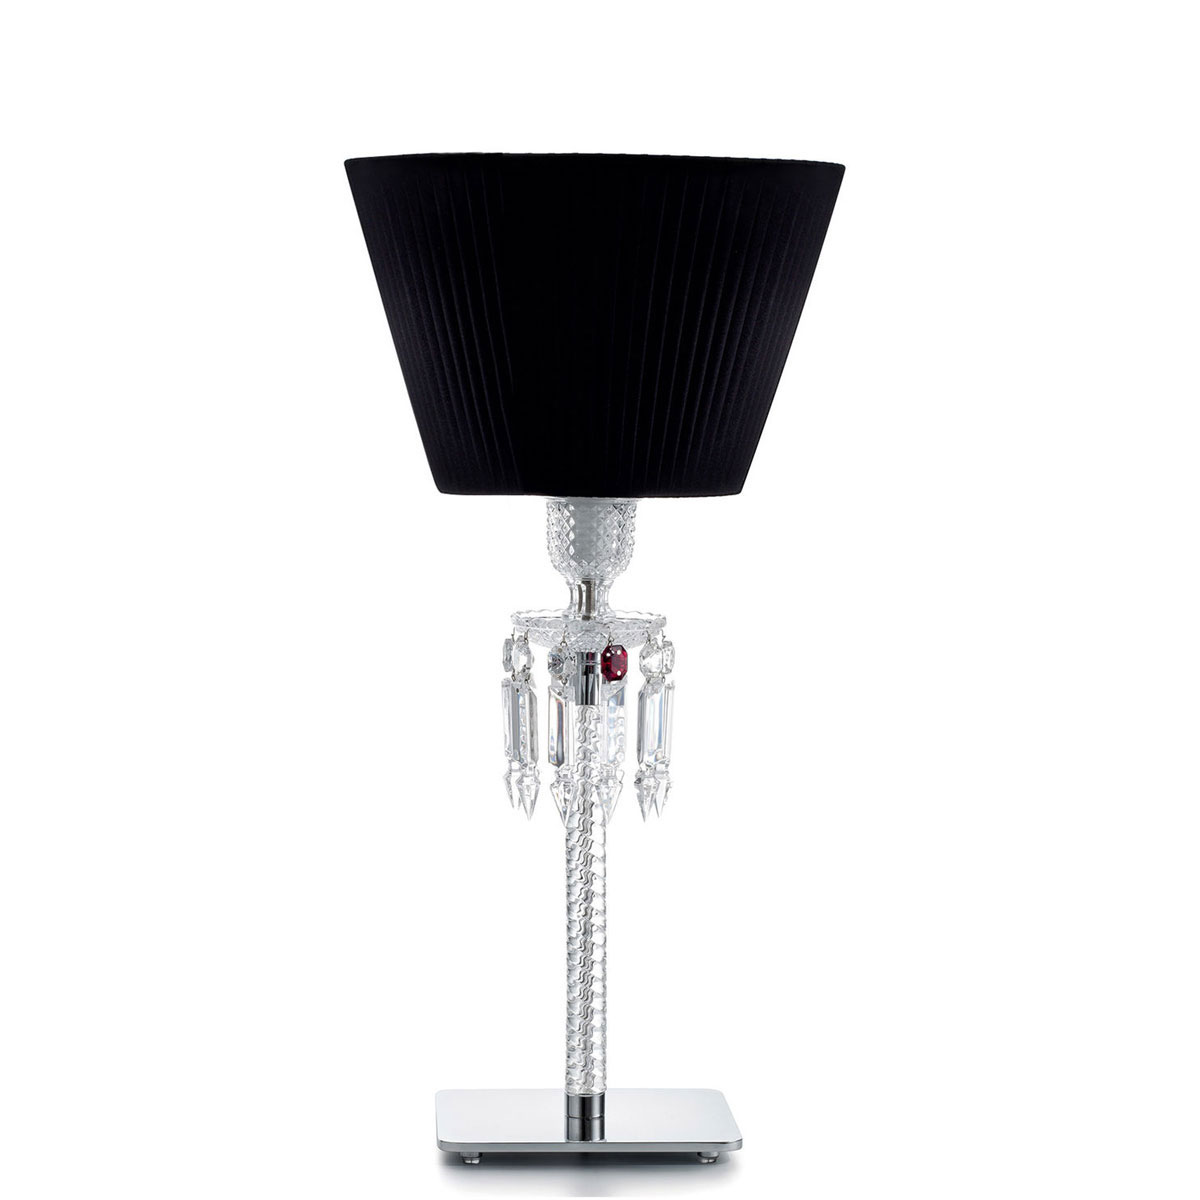 Baccarat Crystal, Torch Crystal Lamp With Black Shade By Arik Levy